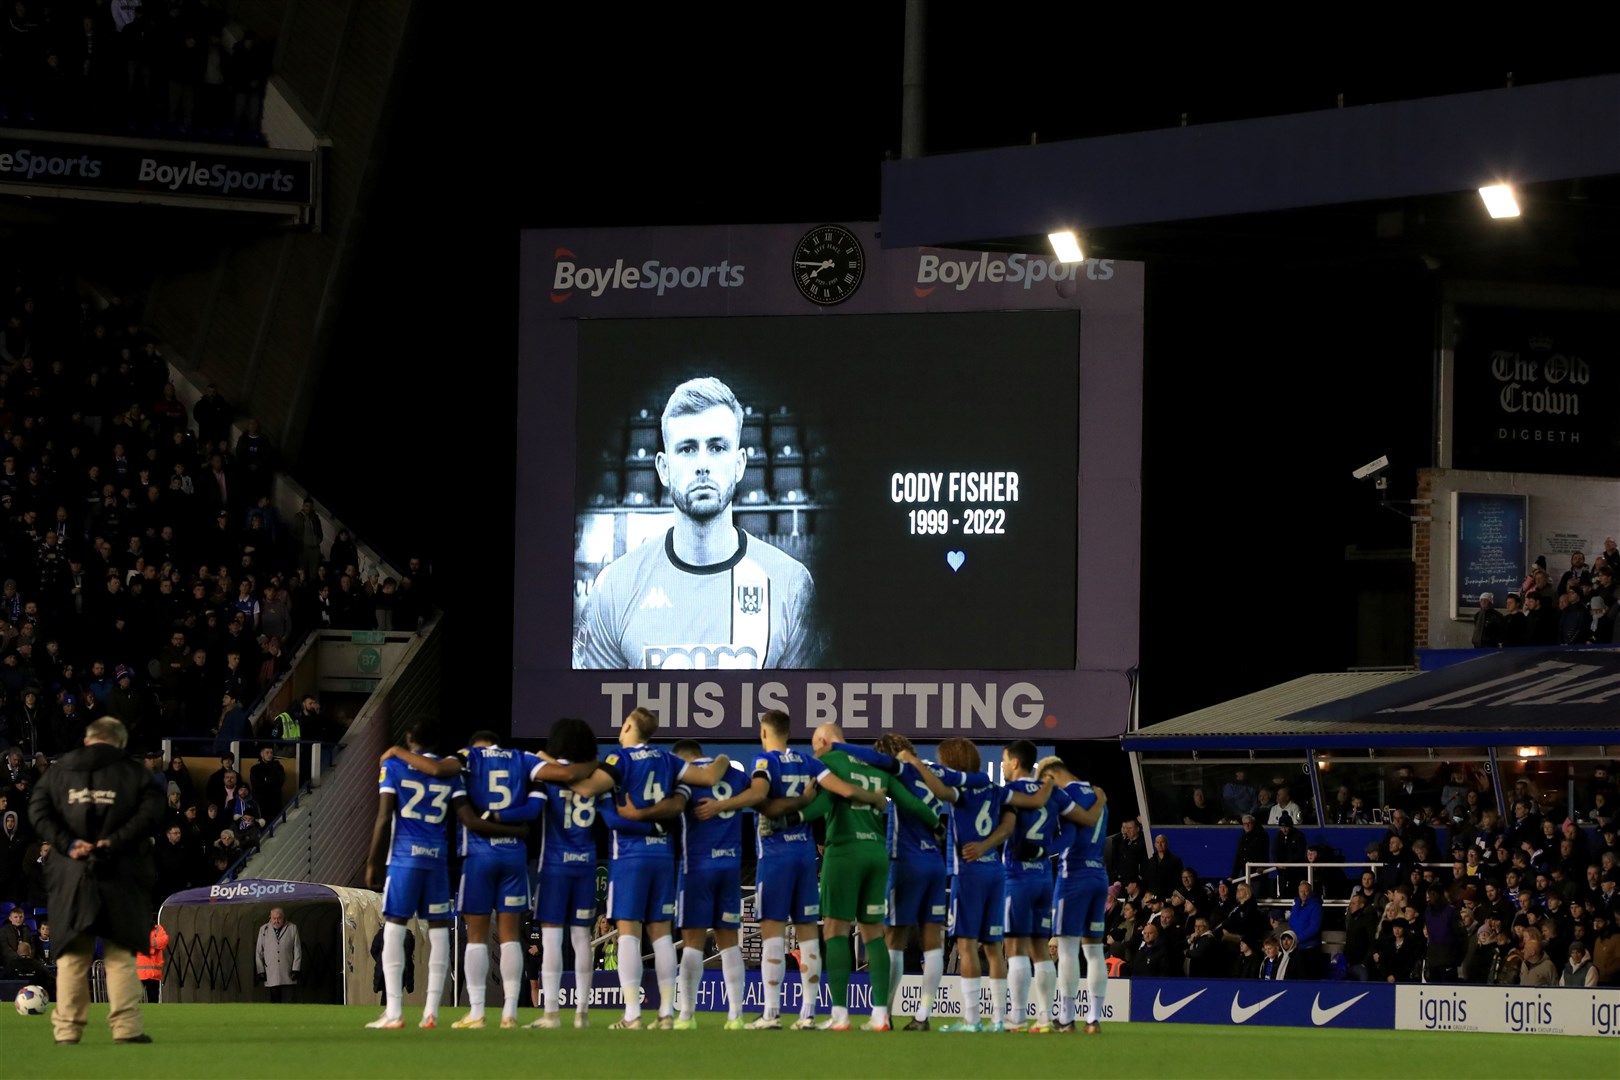 A tribute to Cody Fisher at Birmingham City’s ground (Bradley Collyer/PA)